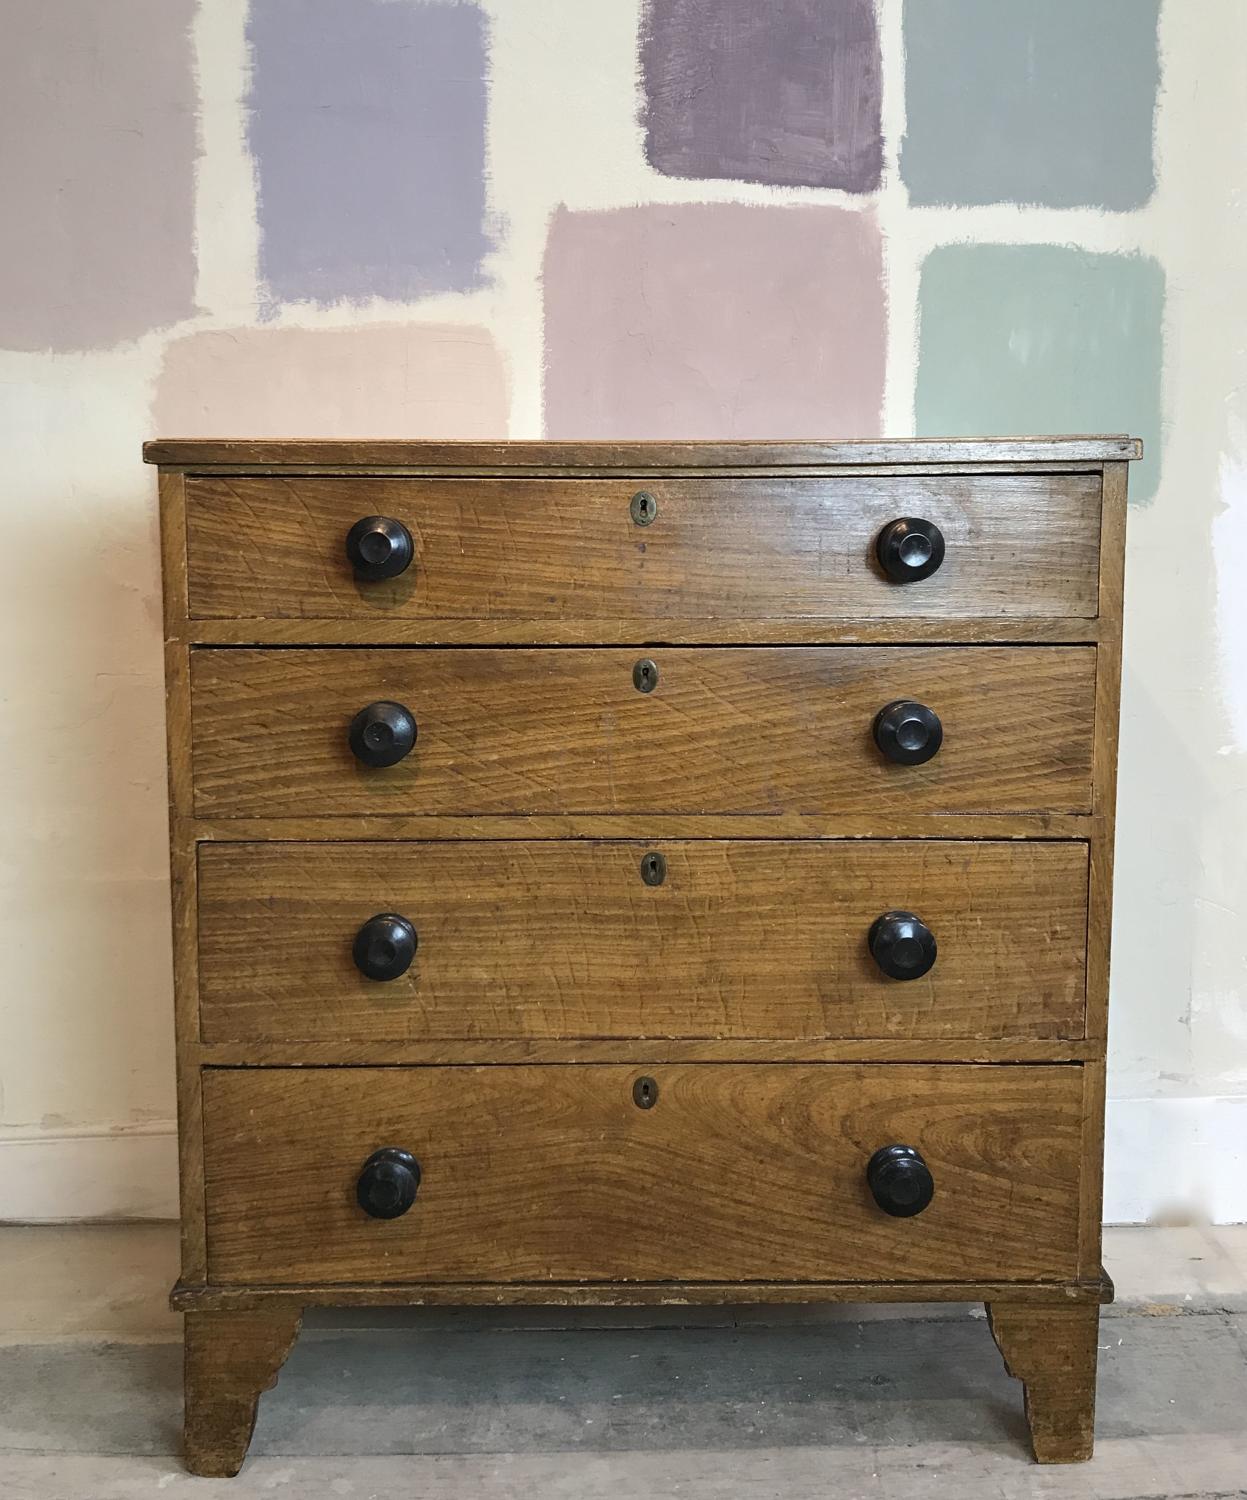 Regency Scumble Glazed Chest of Drawers in Original Paint